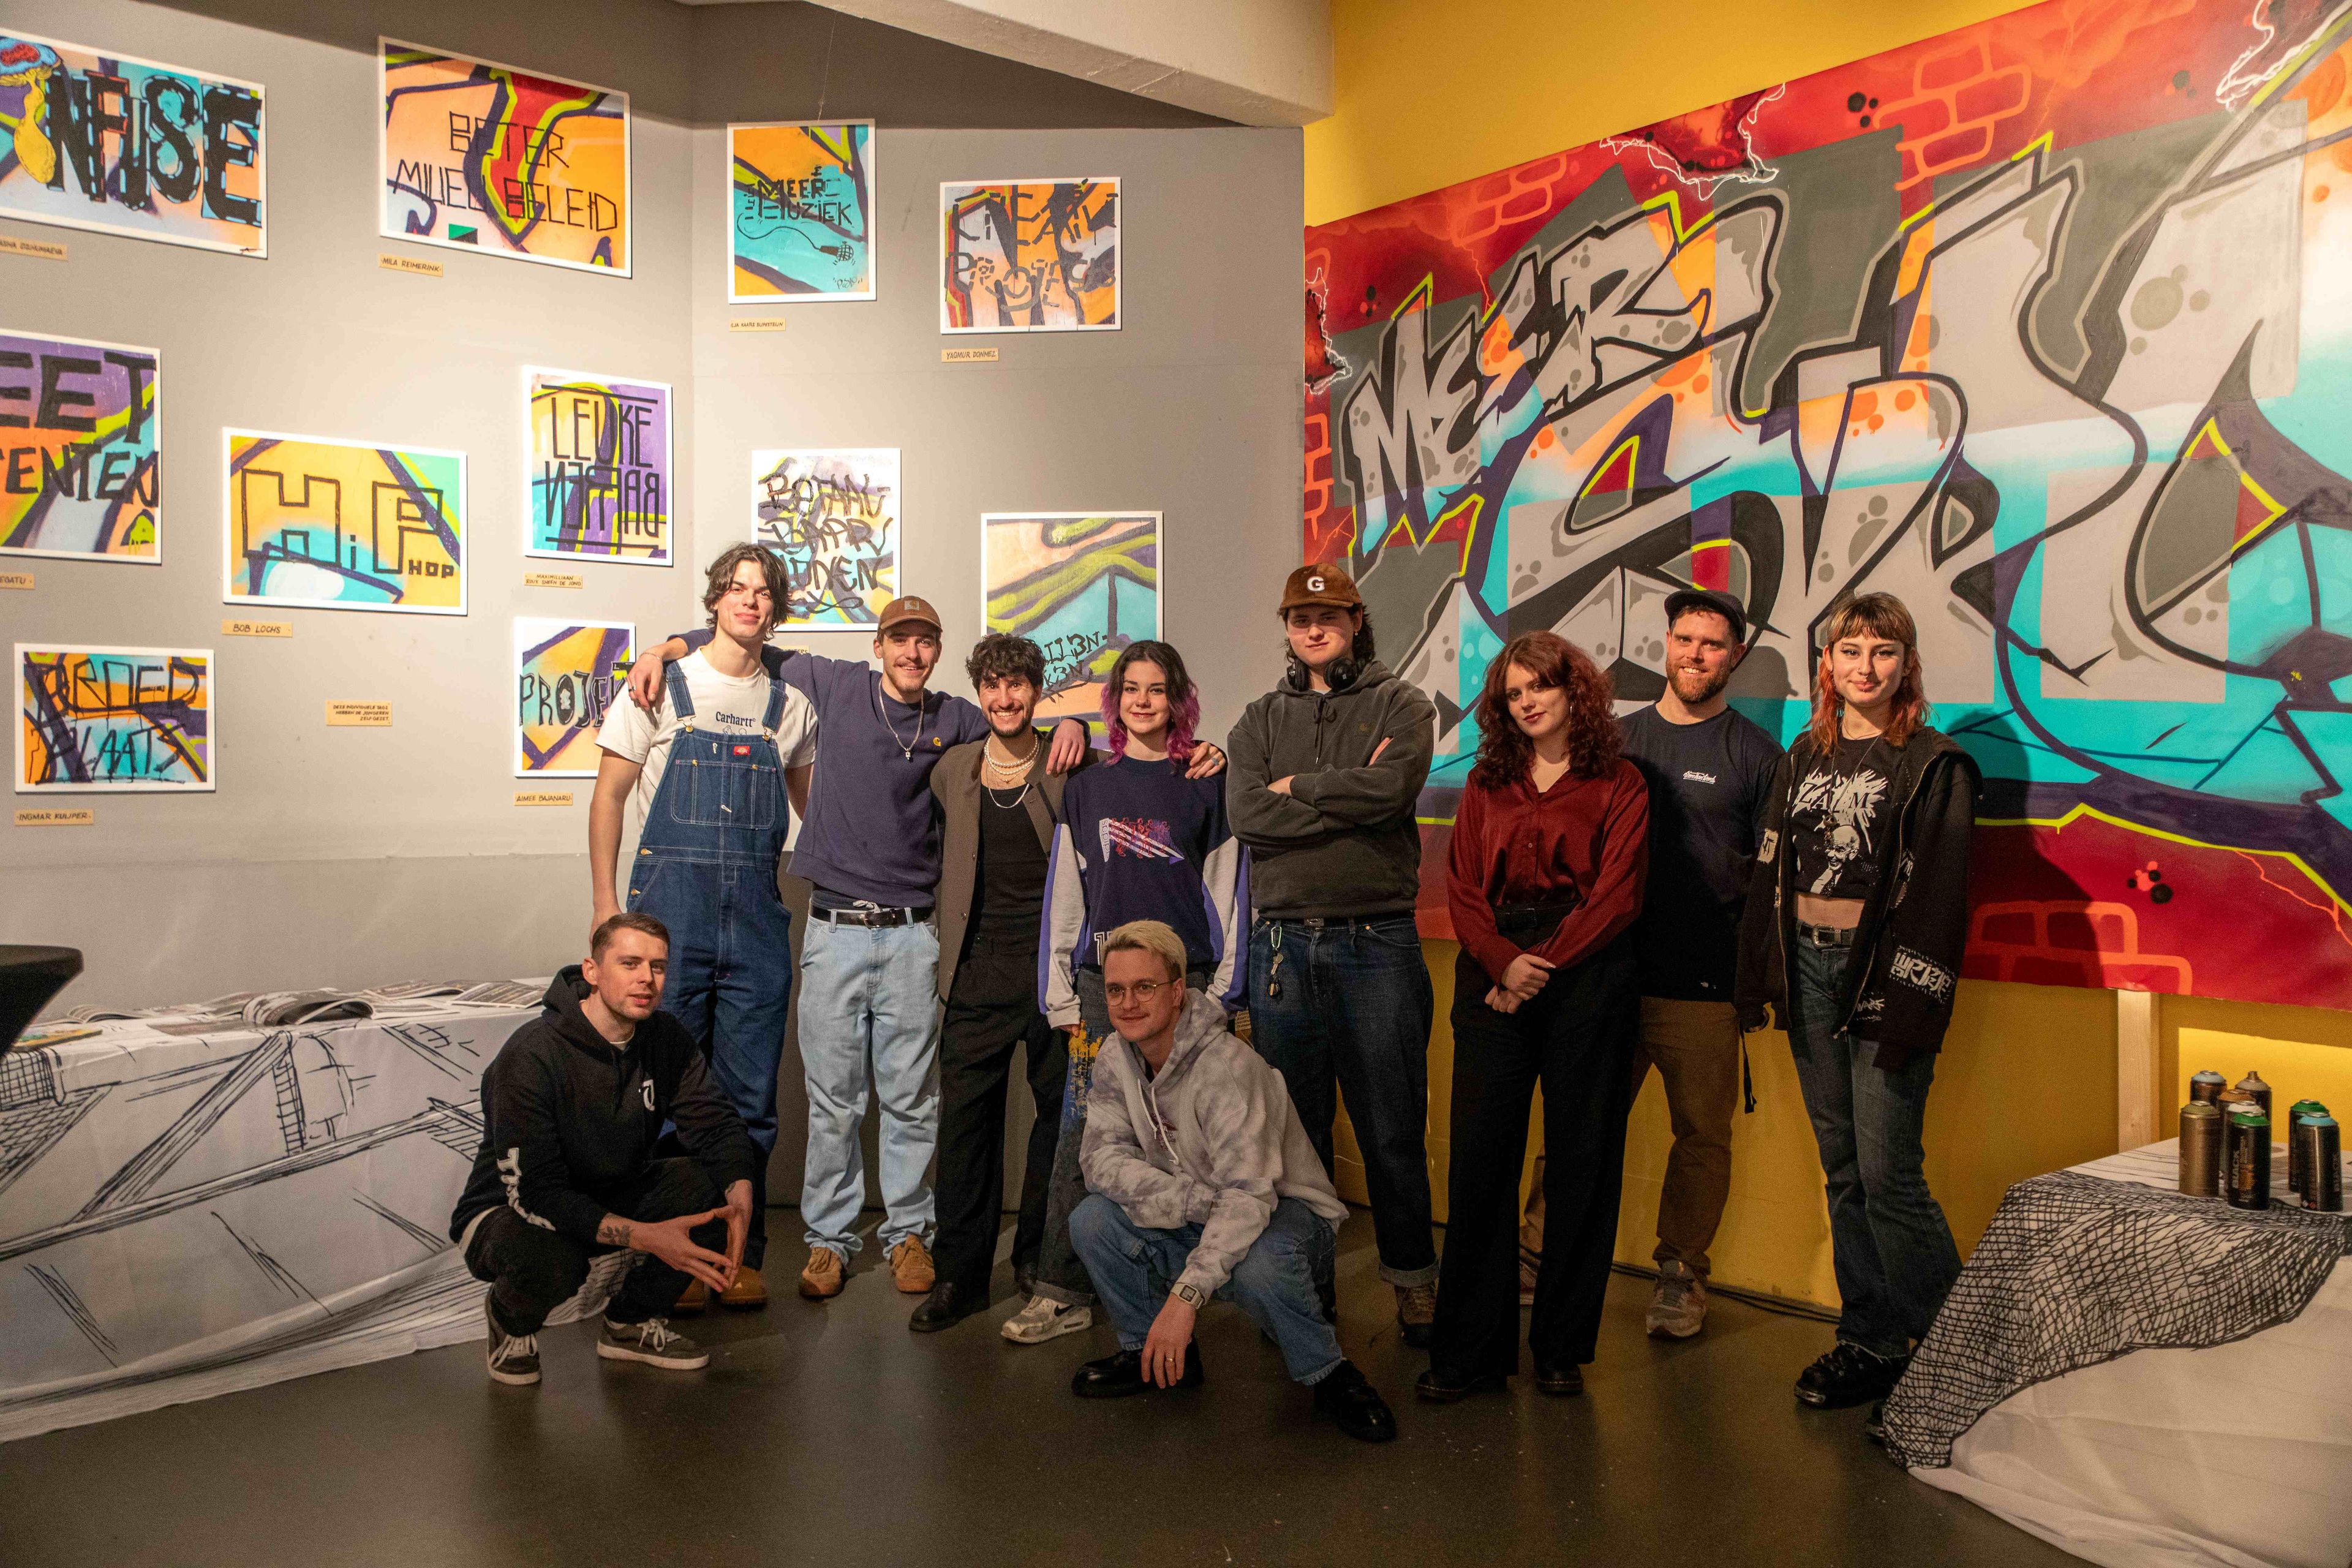 Group photograph of the young people who took part in the ‘ON THE SPOT’ exhibition, by Paik van Schagen 